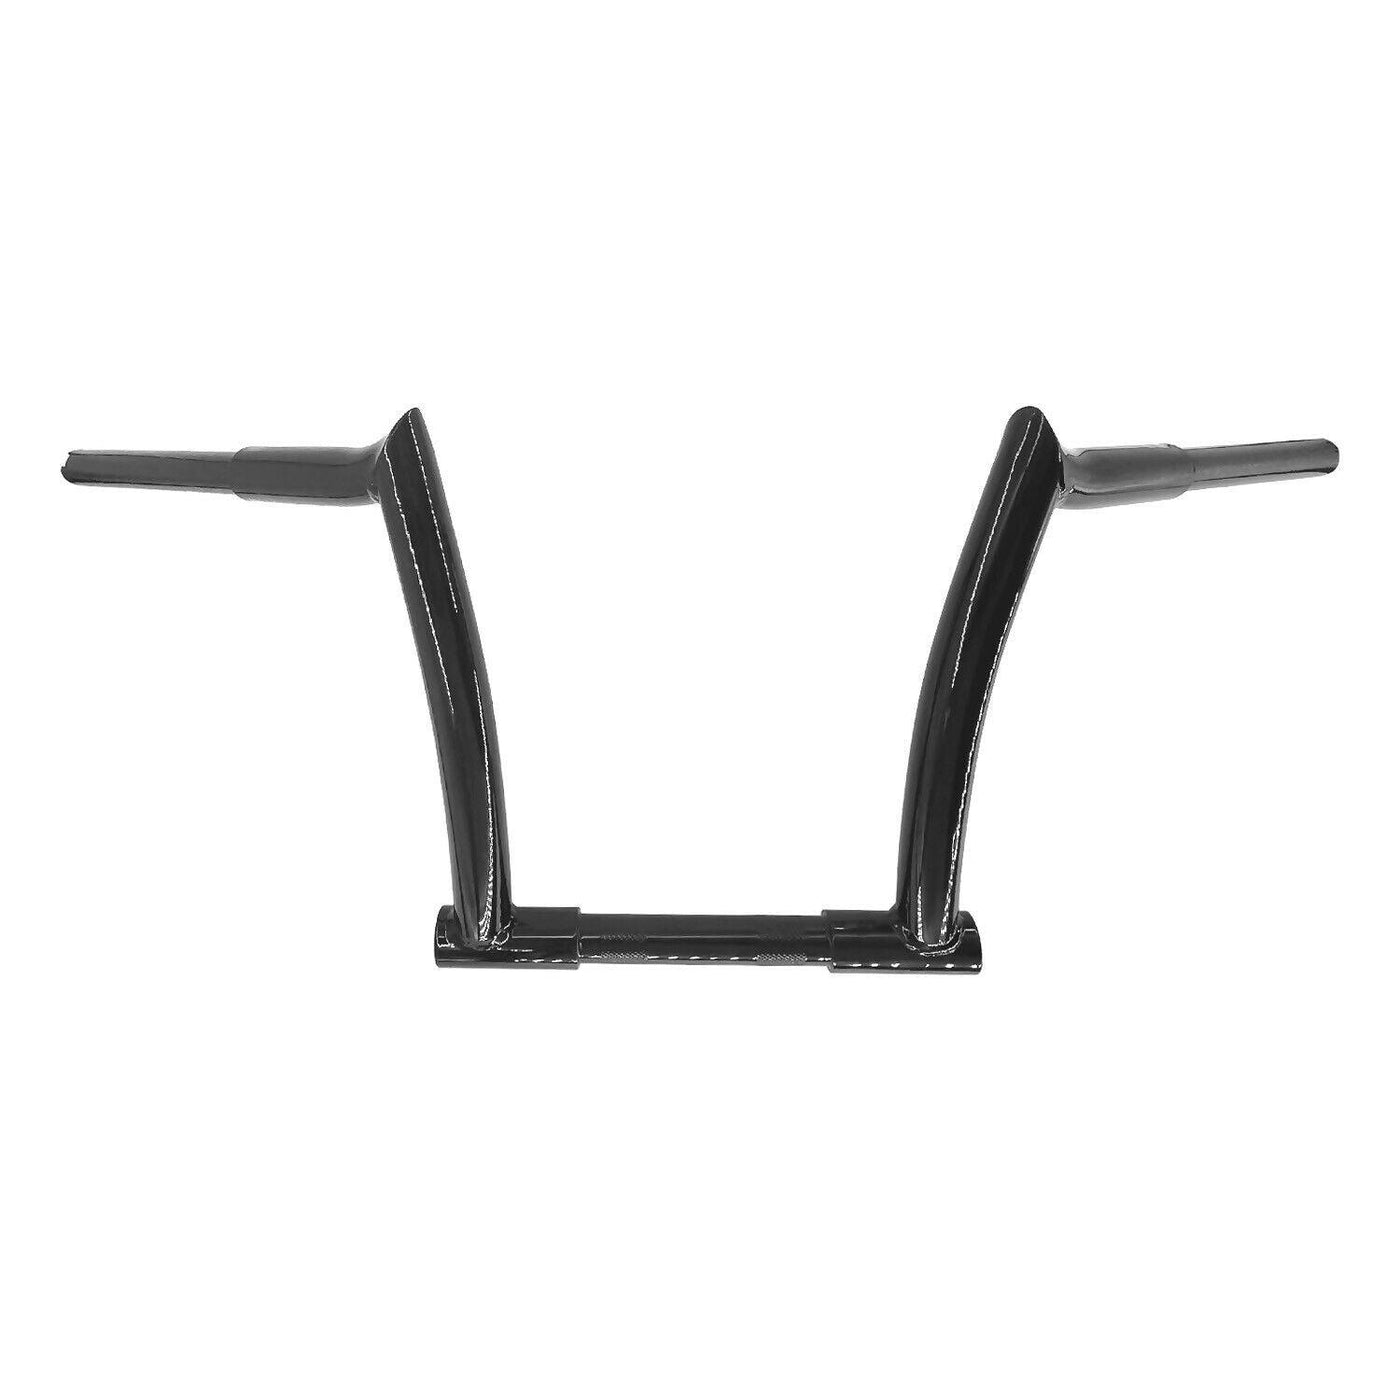 1.25" Fat 14" Rise Ape Hanger Bar Handlebar For Harley Sportster Softail Touring - Moto Life Products